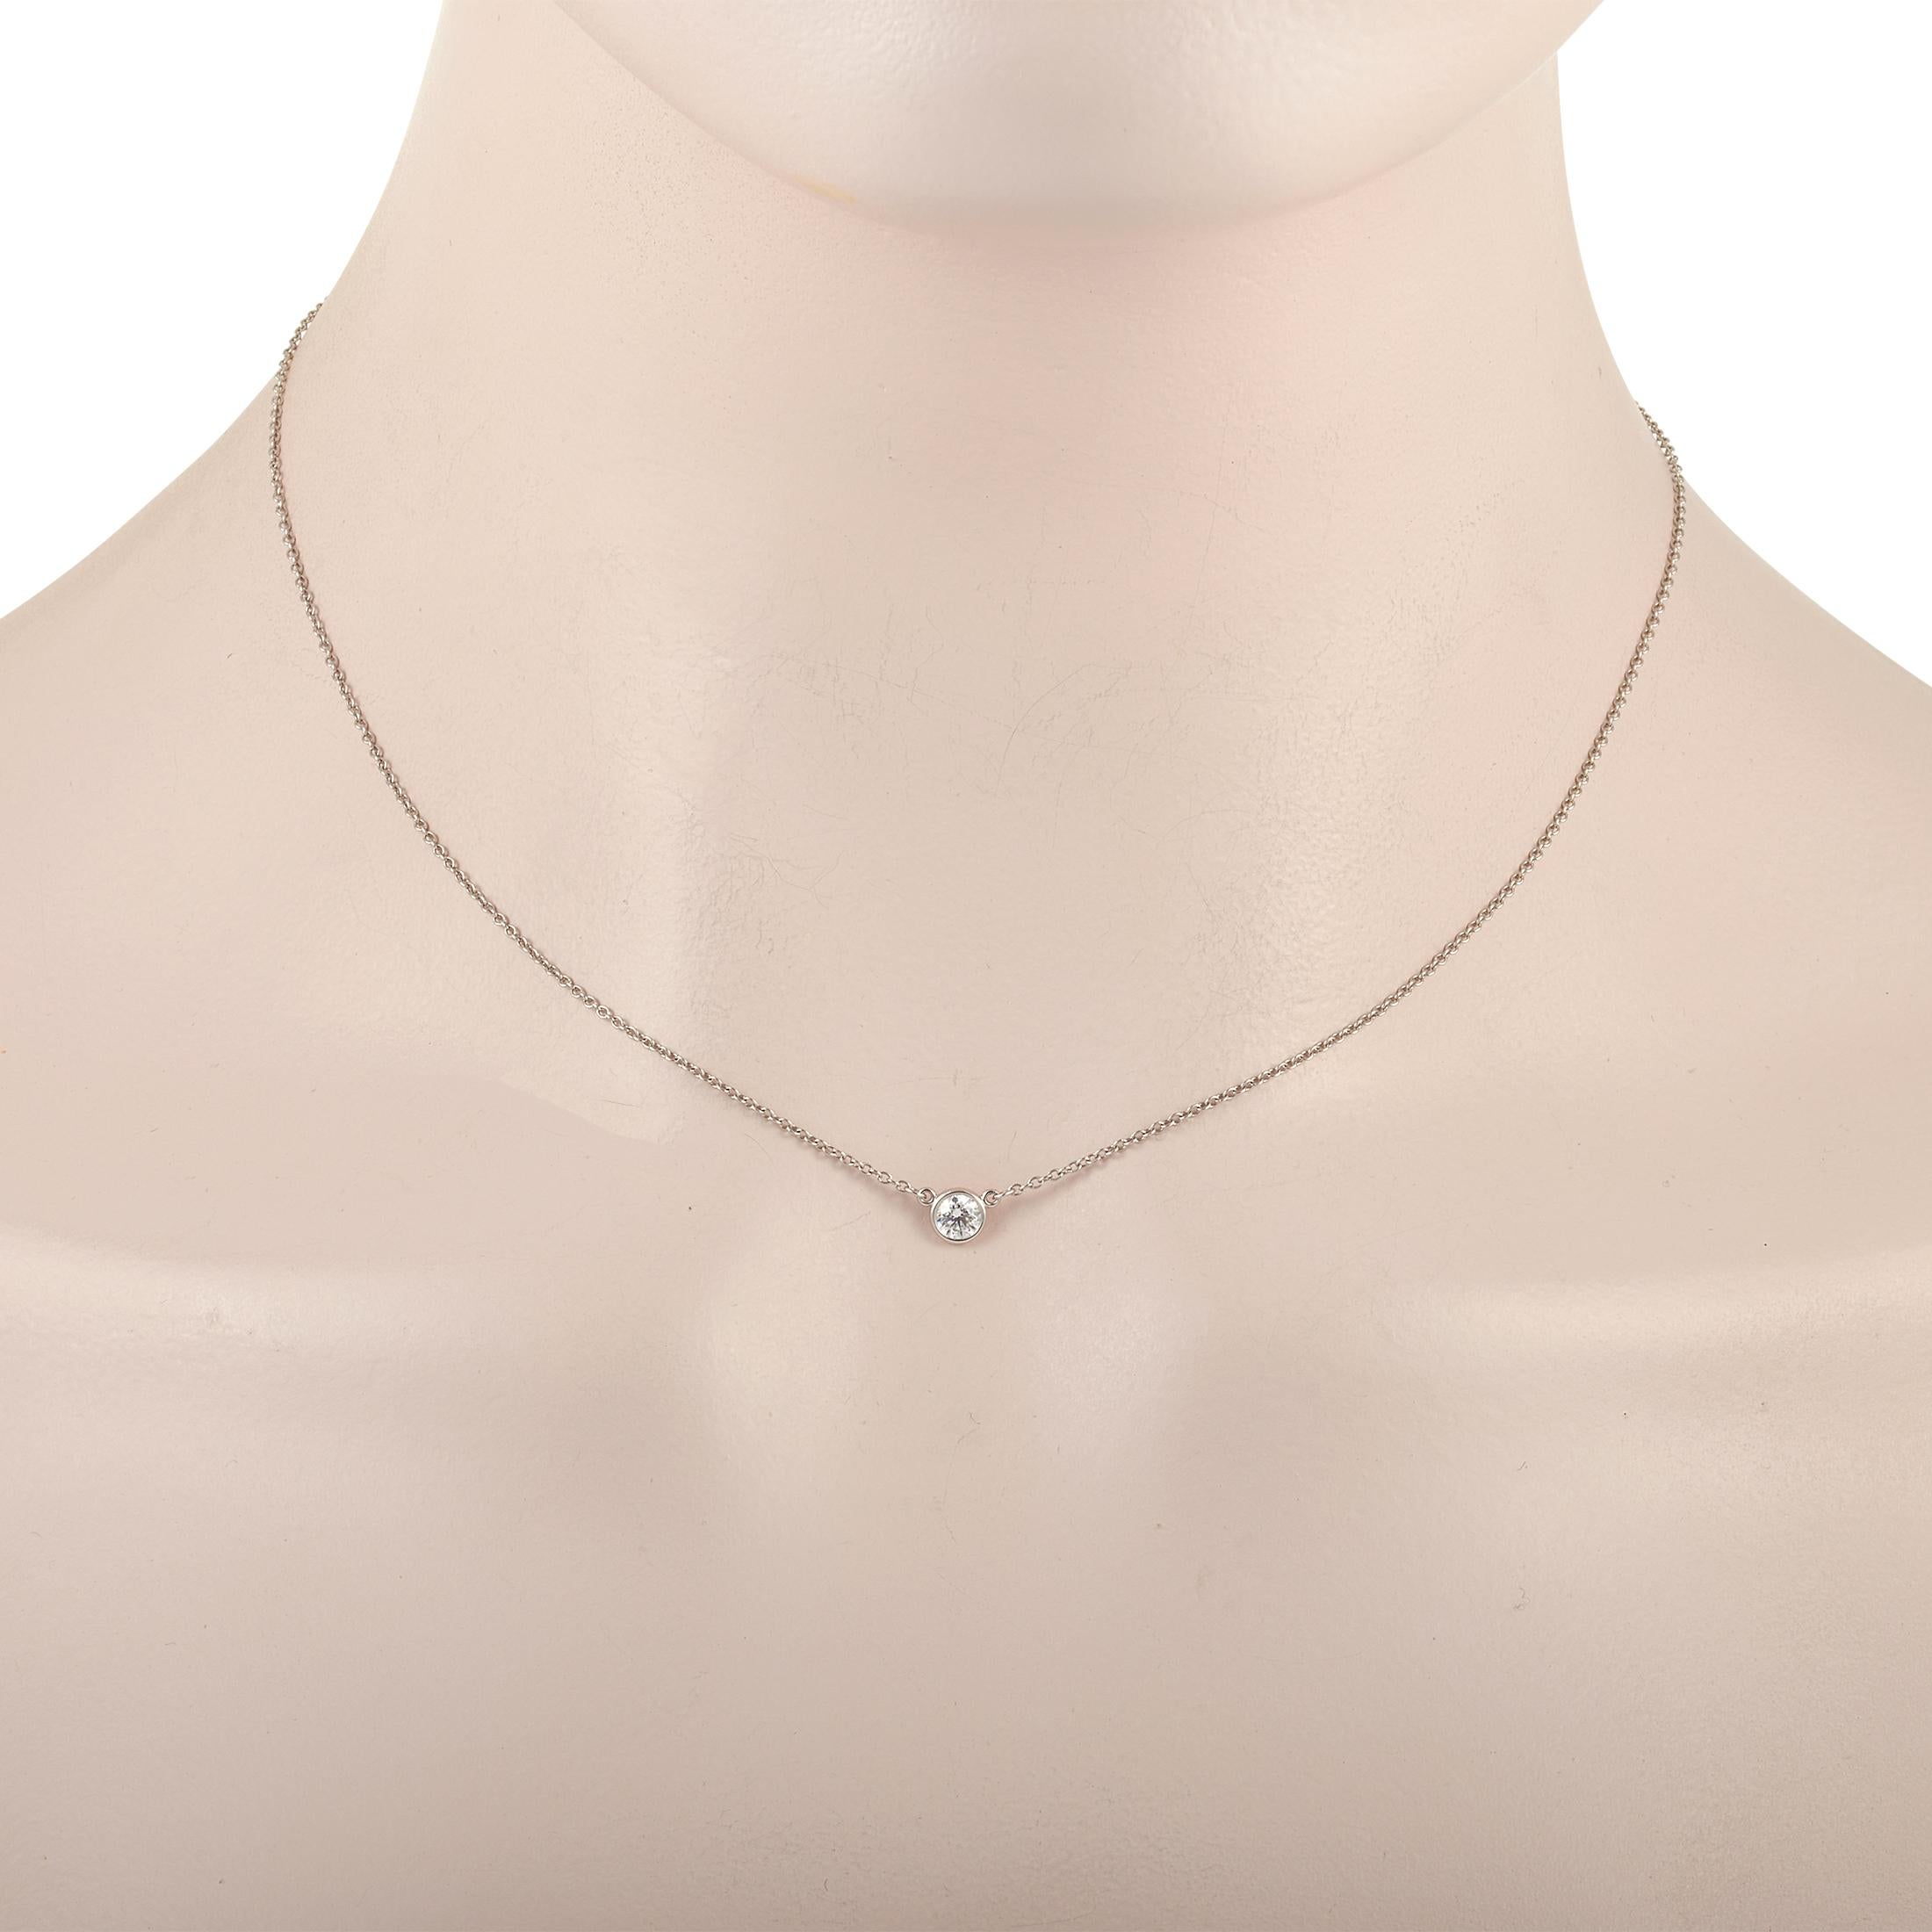 Polish any look with the dainty elegance of this Tiffany & Co. Platinum 0.25 ct Round Diamond by The Yard Solitaire Necklace. It is designed with a delicate cable chain necklace measuring 16 inches long and a single 0.25-carat bezel-set round